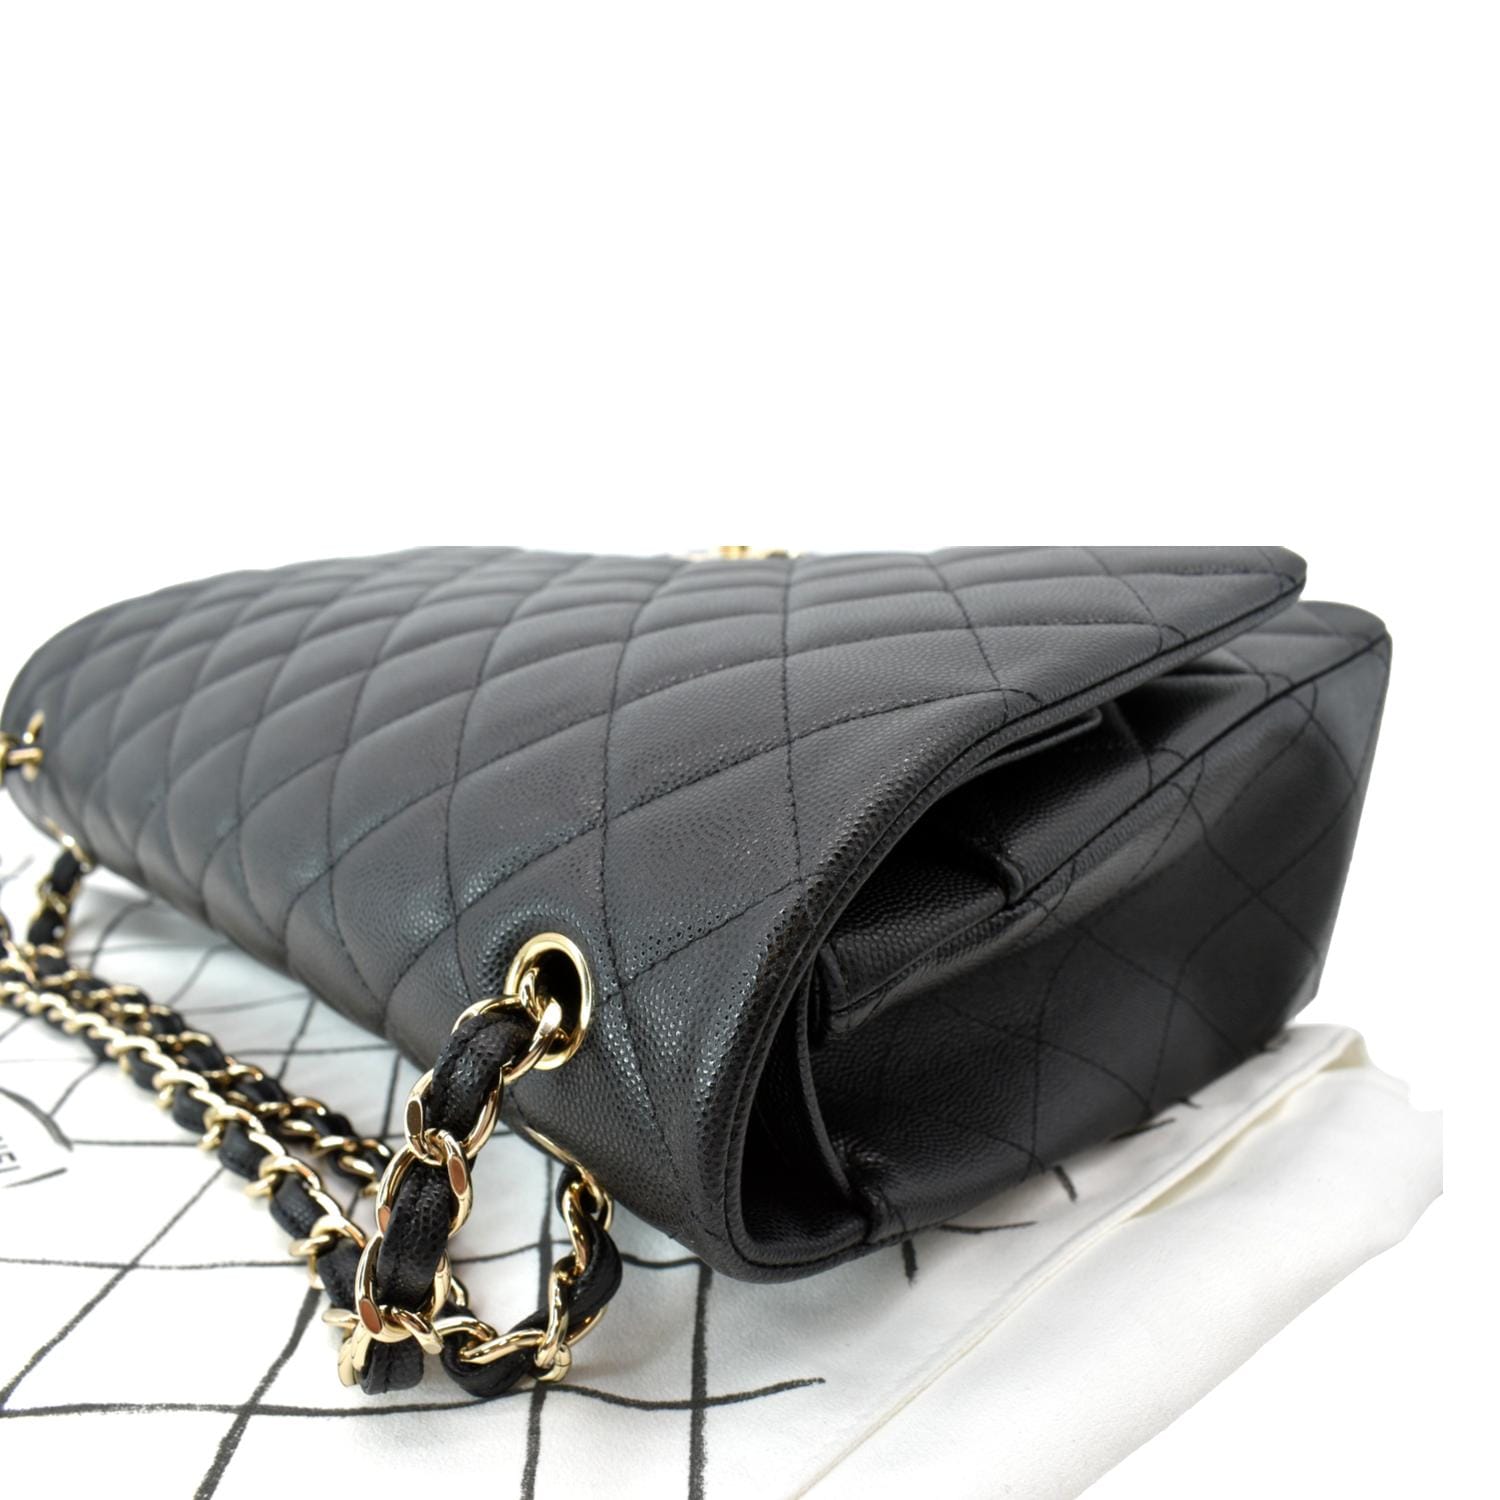 Can't beat a classic - Chanel jumbo flap bag black caviar with